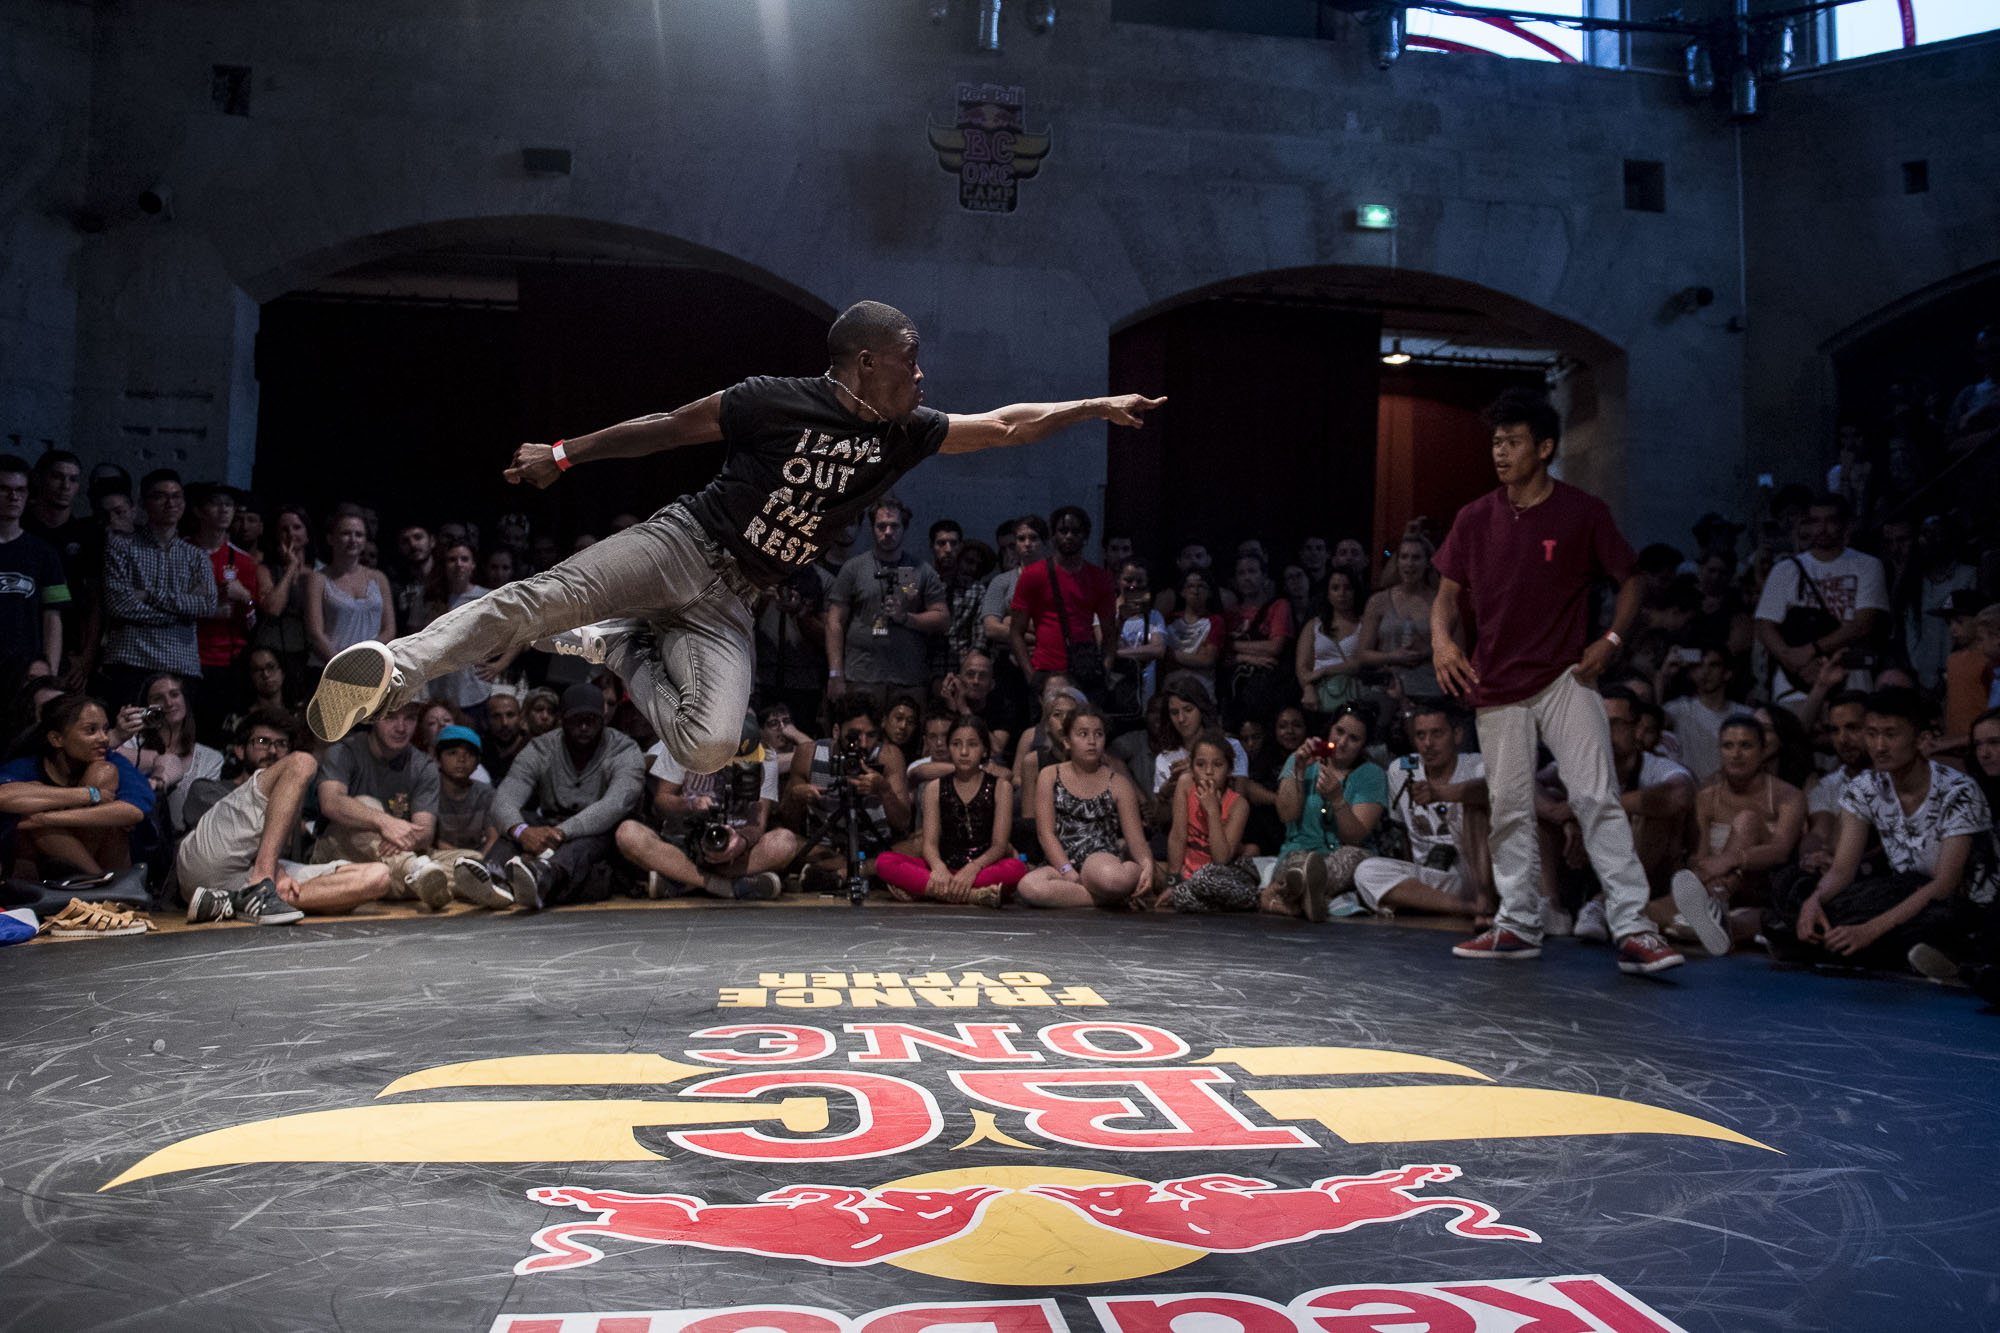 Artson competes at the WIP Villette during the Red Bull BC One France Cypher Final in Paris, France on July 10th 2016.